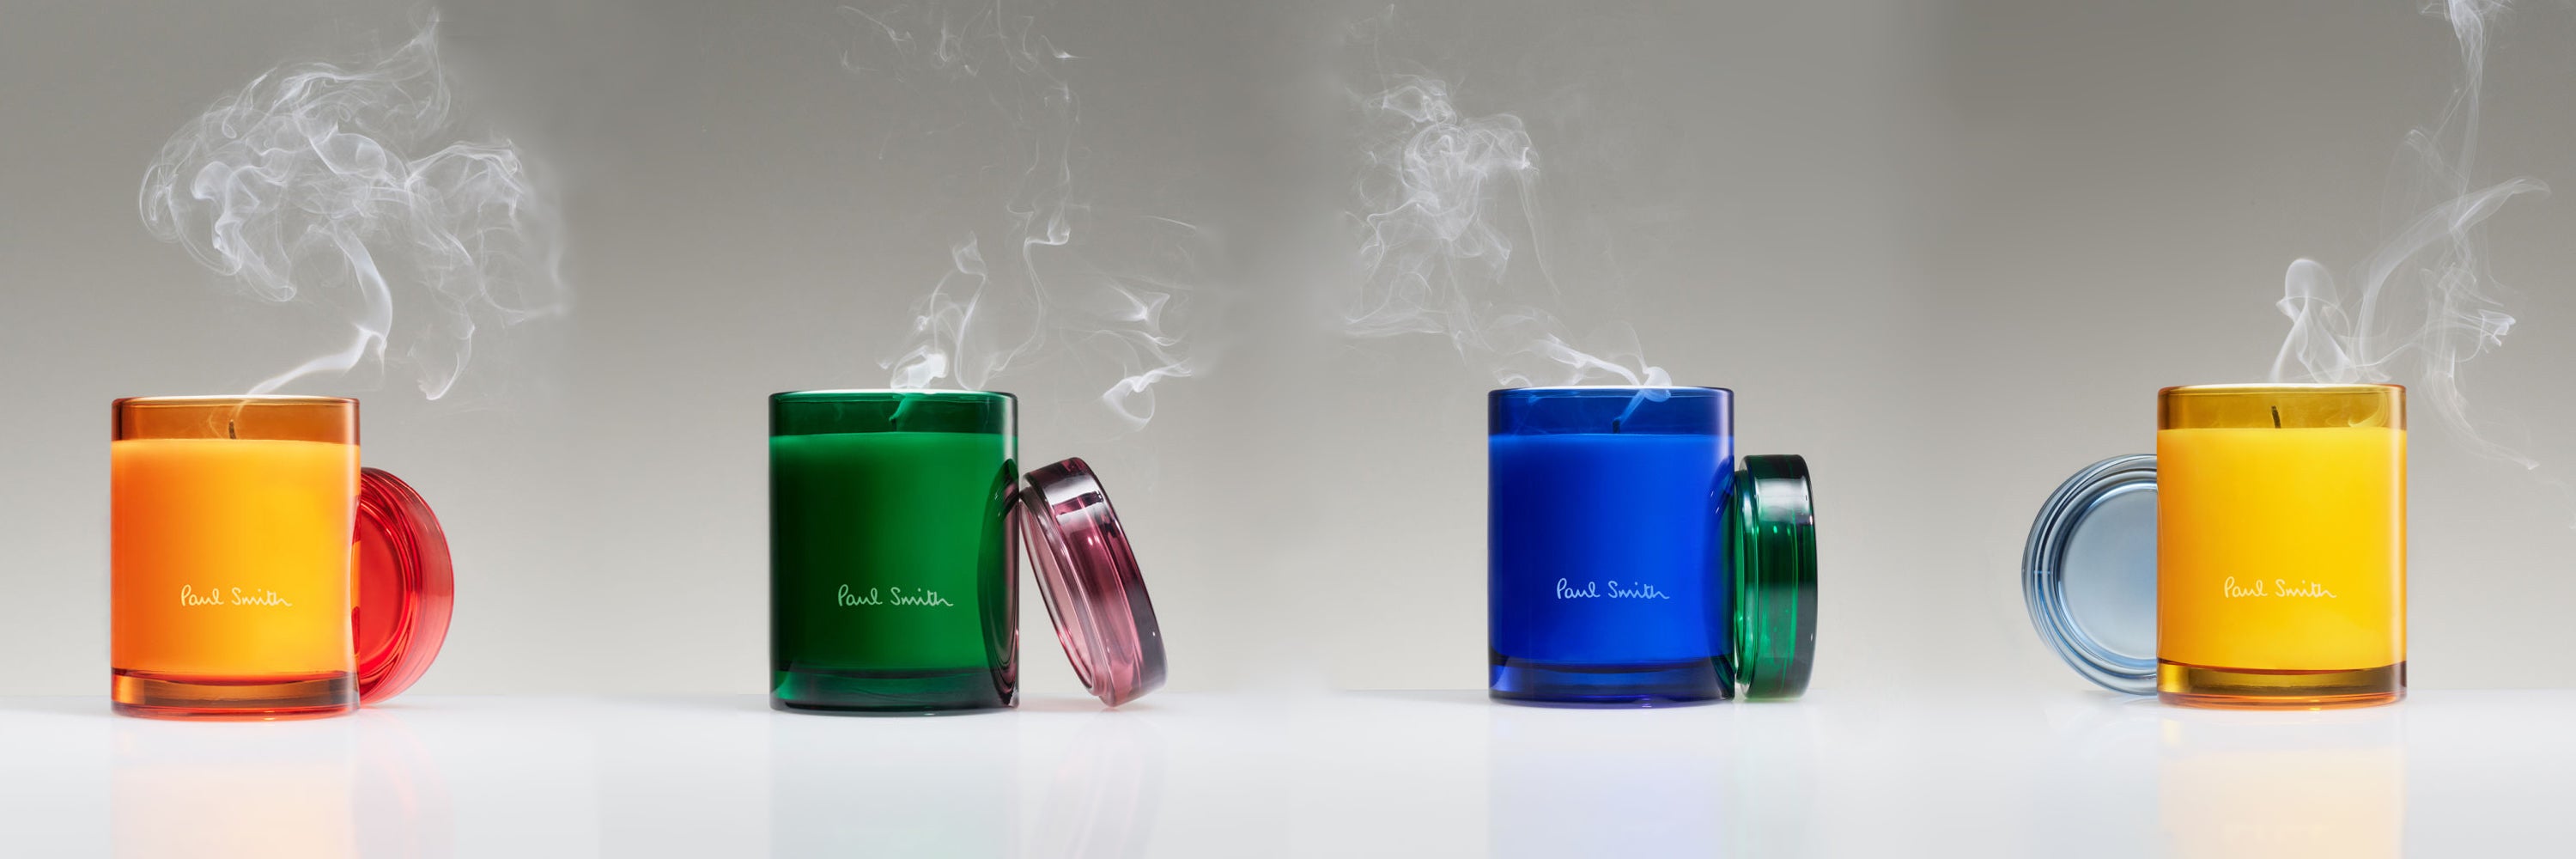 Paul Smith Home Collection at Aedes Perfumery